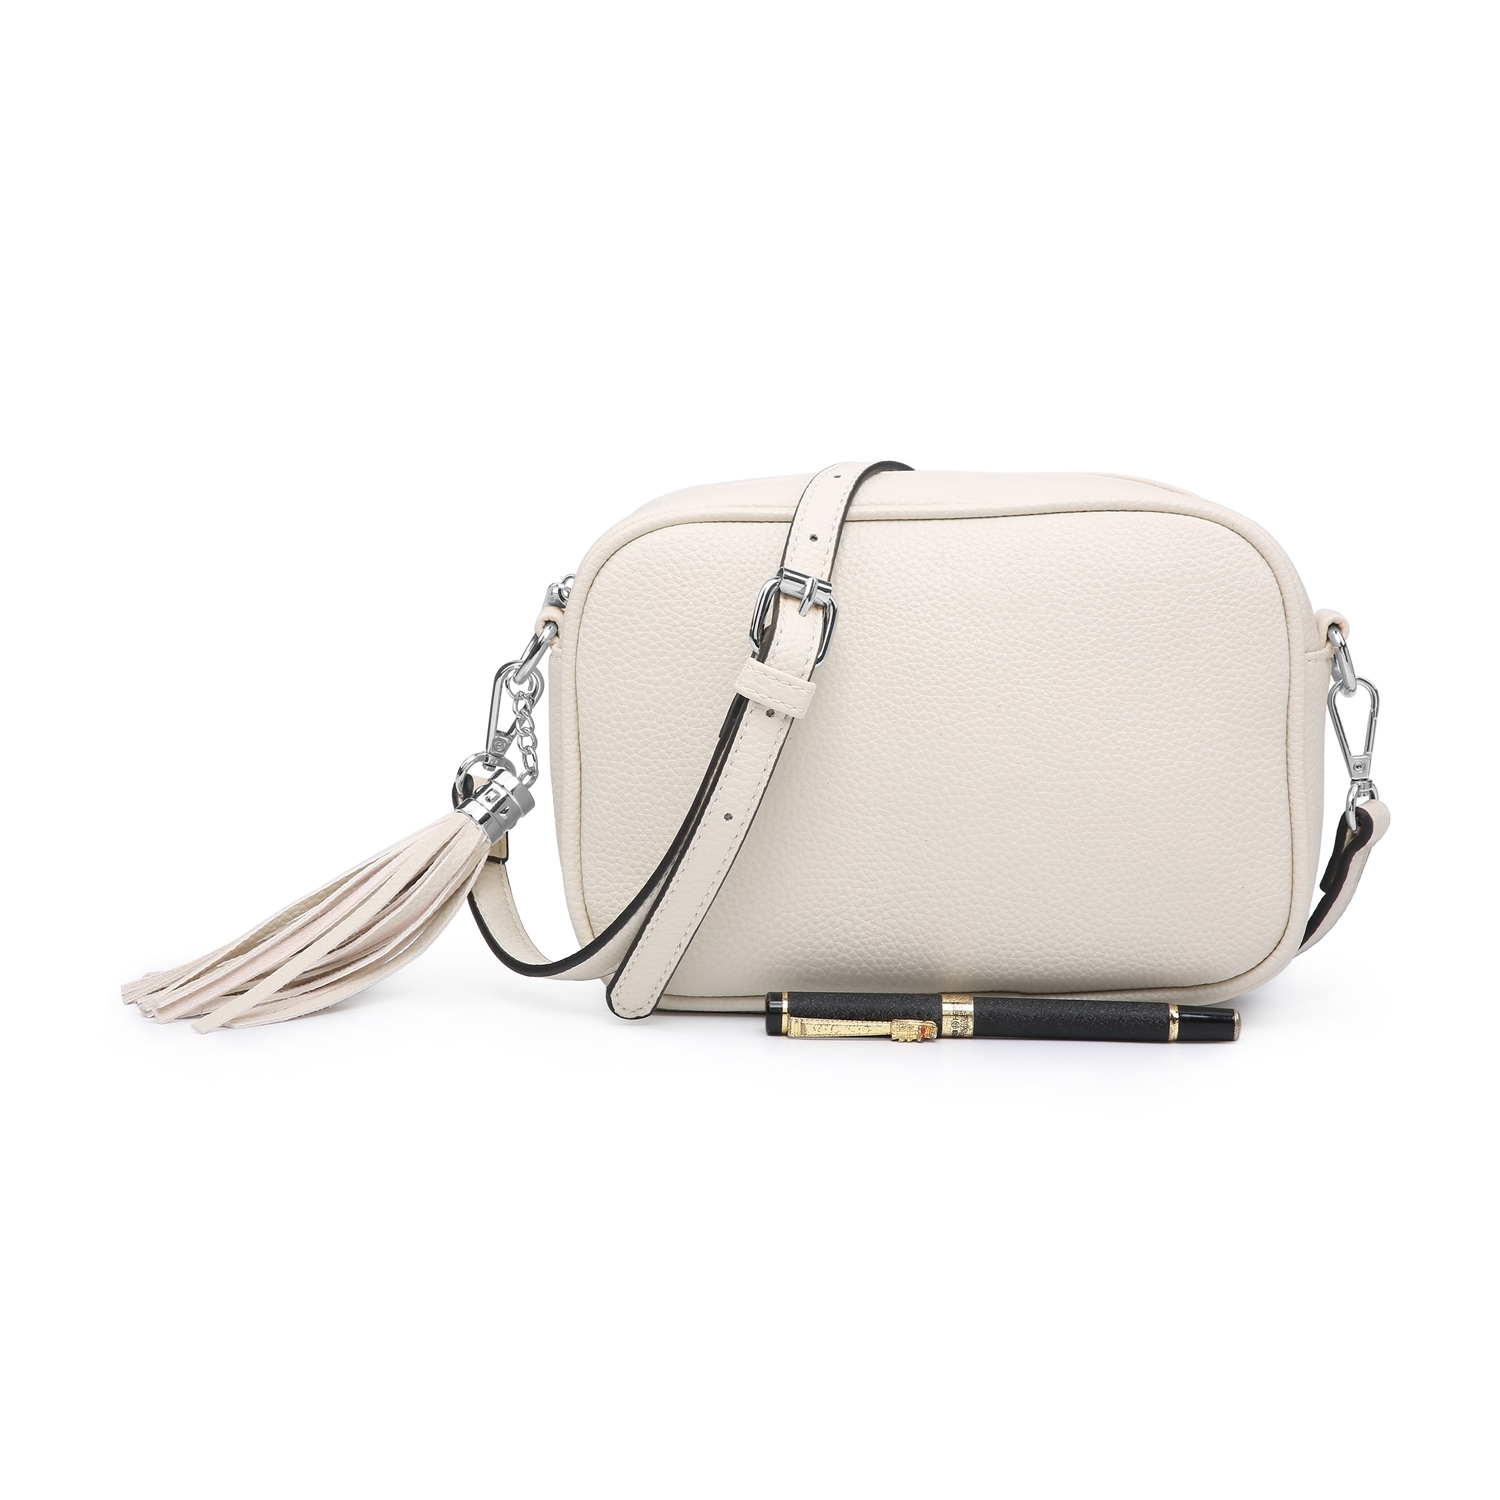 CROSS BODY BAG WITH SILVER  HARDWARE